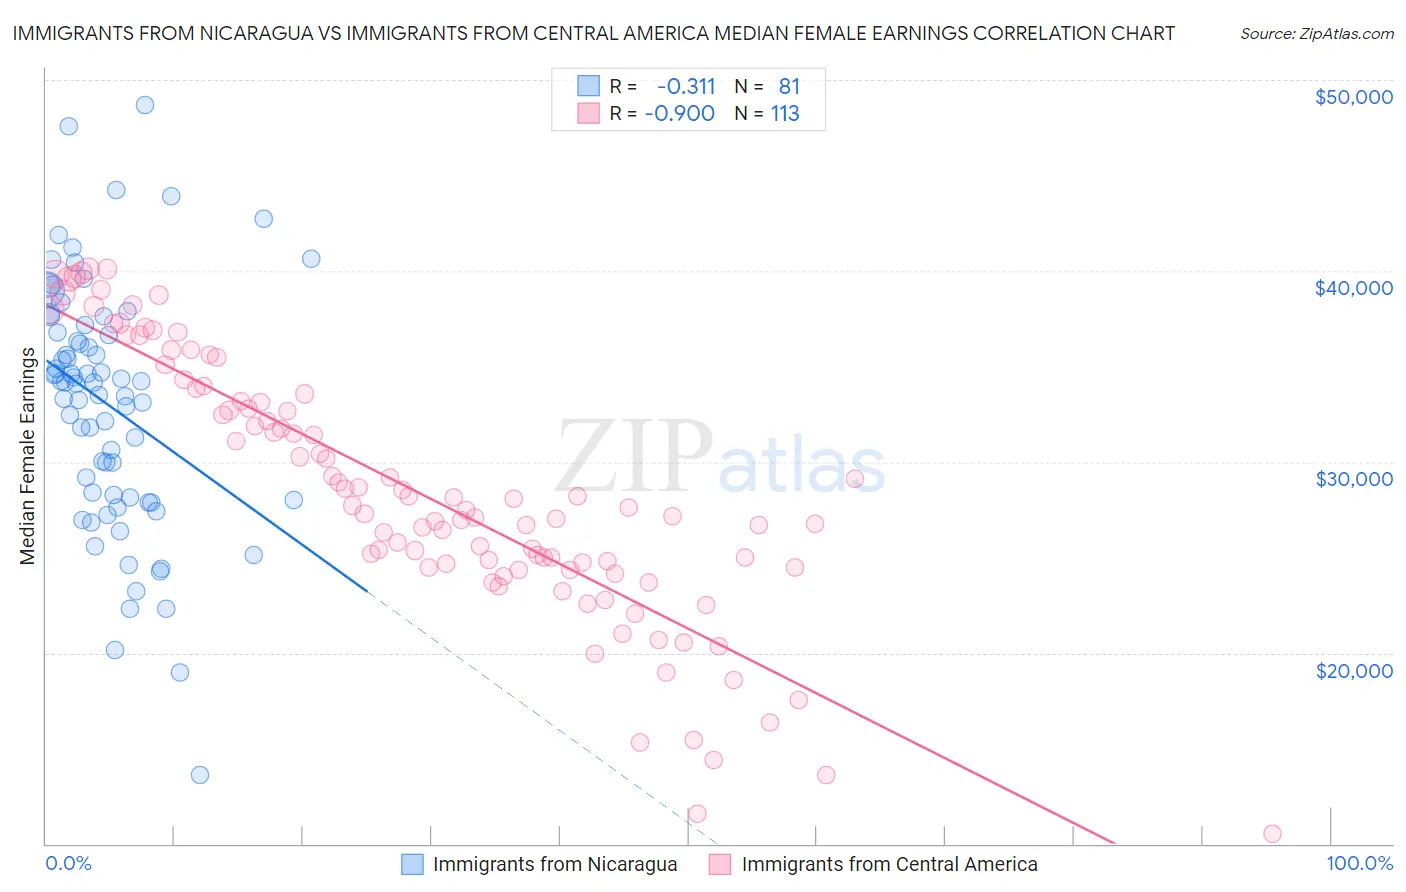 Immigrants from Nicaragua vs Immigrants from Central America Median Female Earnings